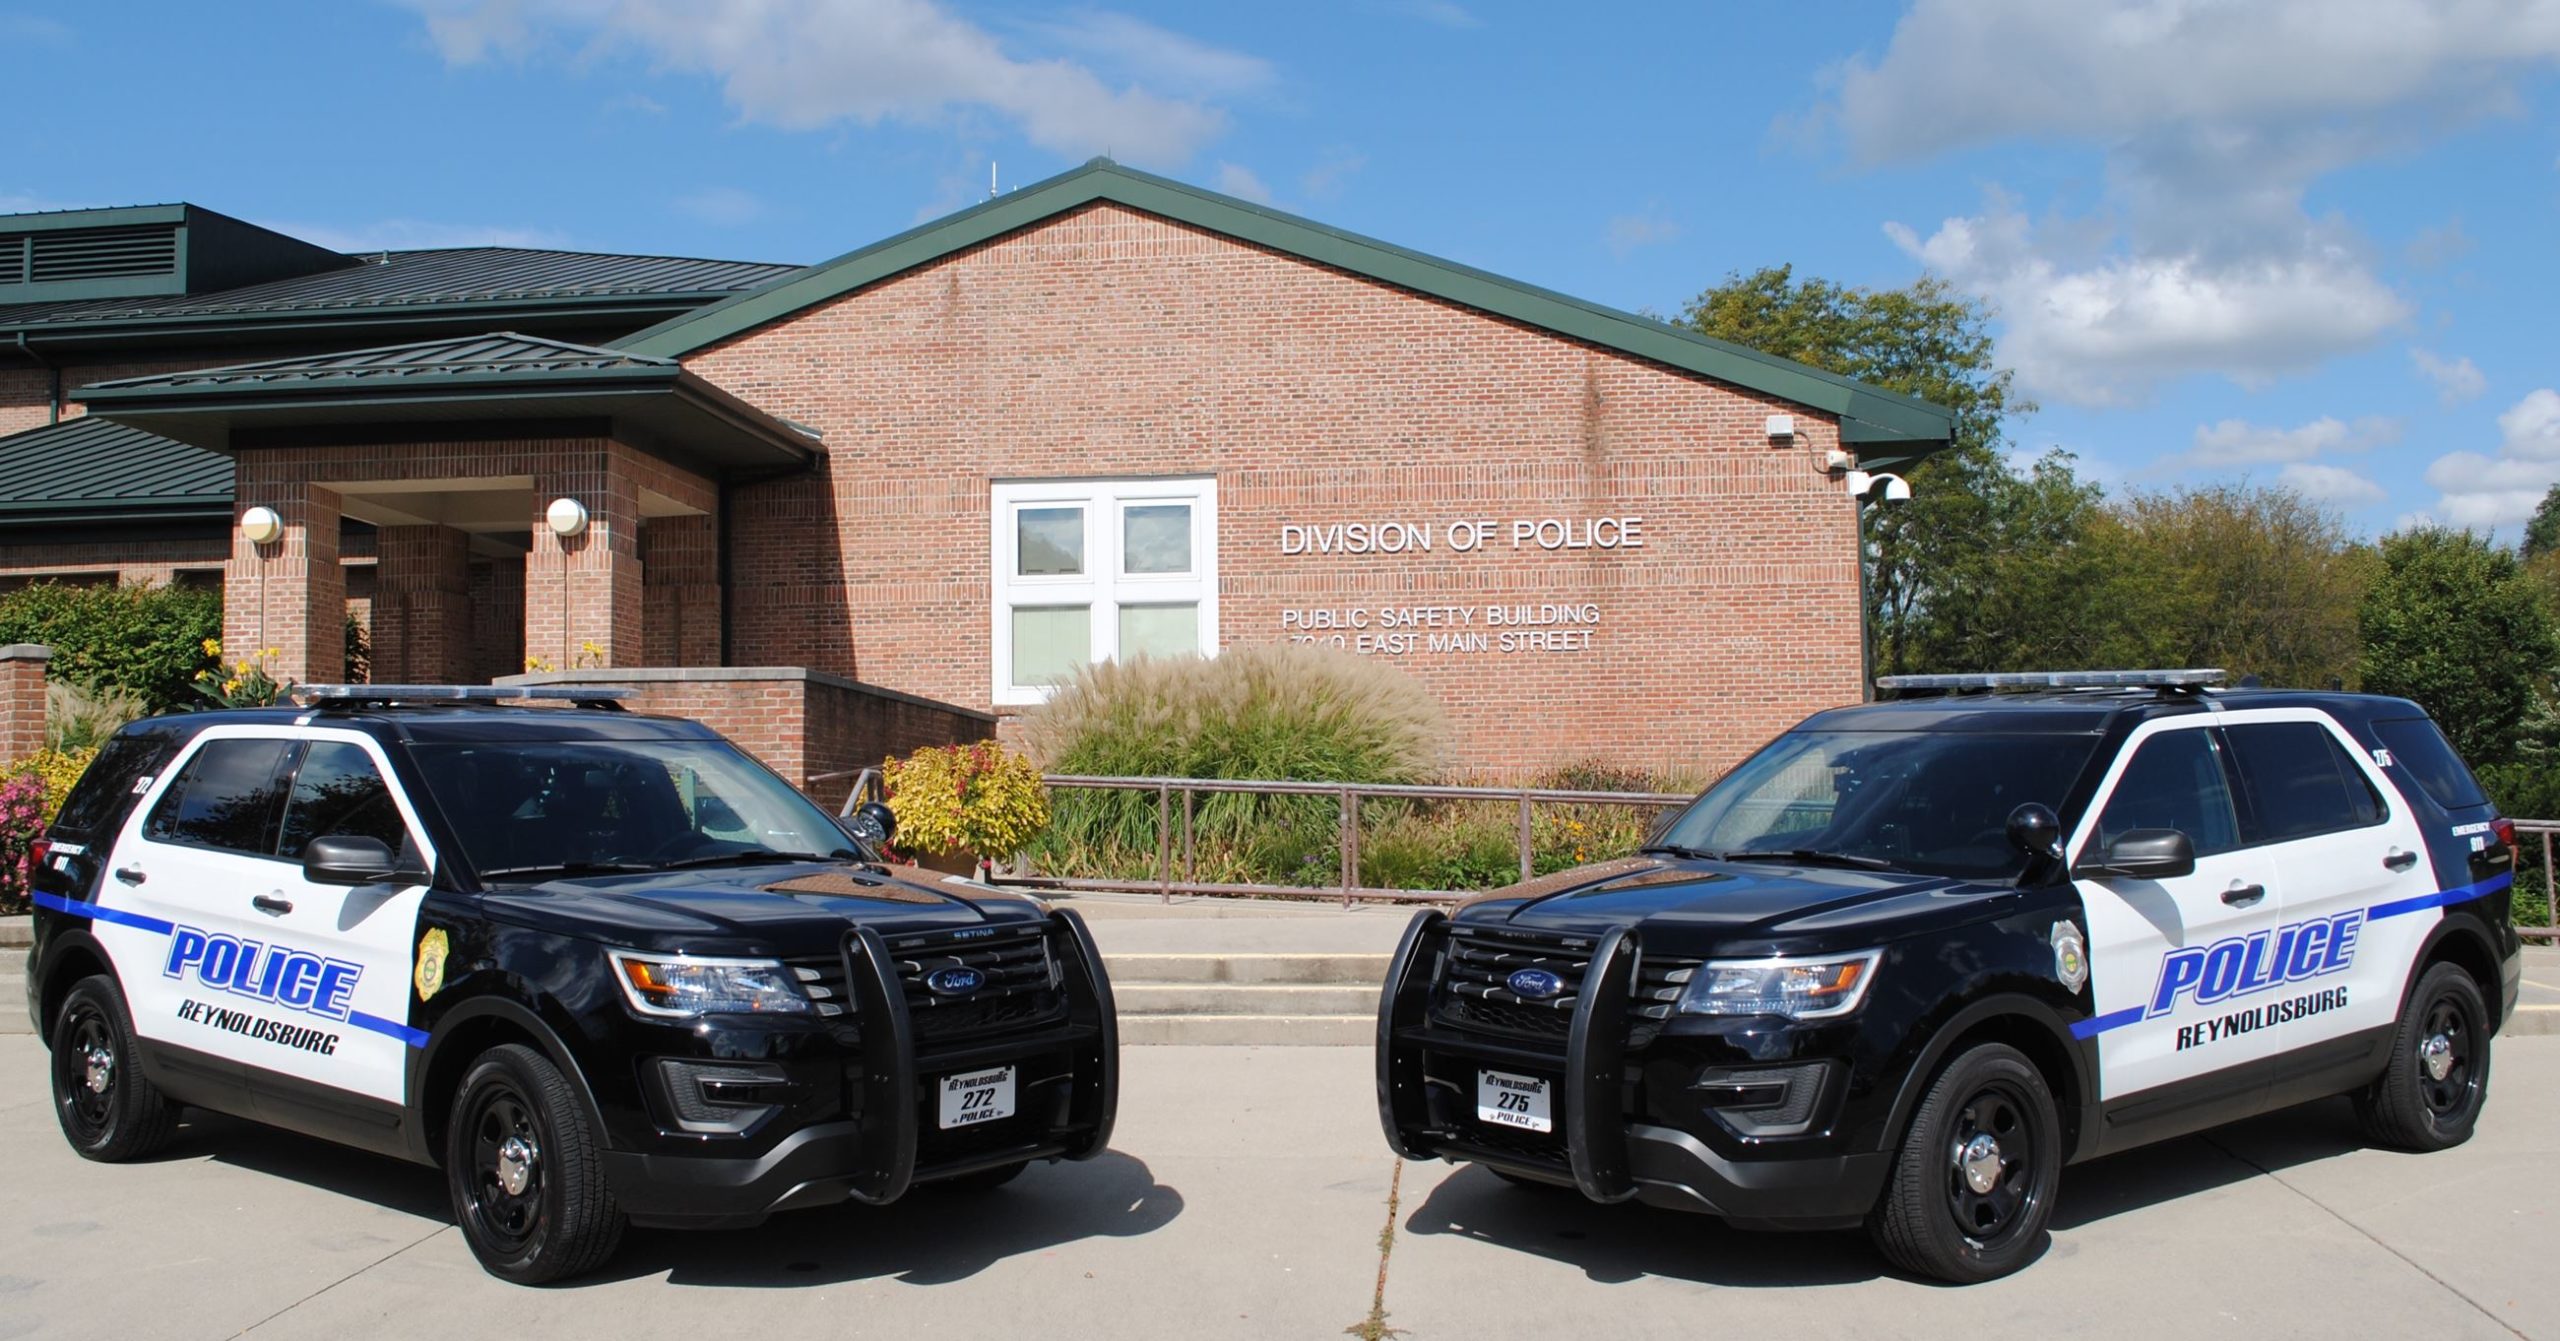 Featured image for “City of Reynoldsburg Police Department”